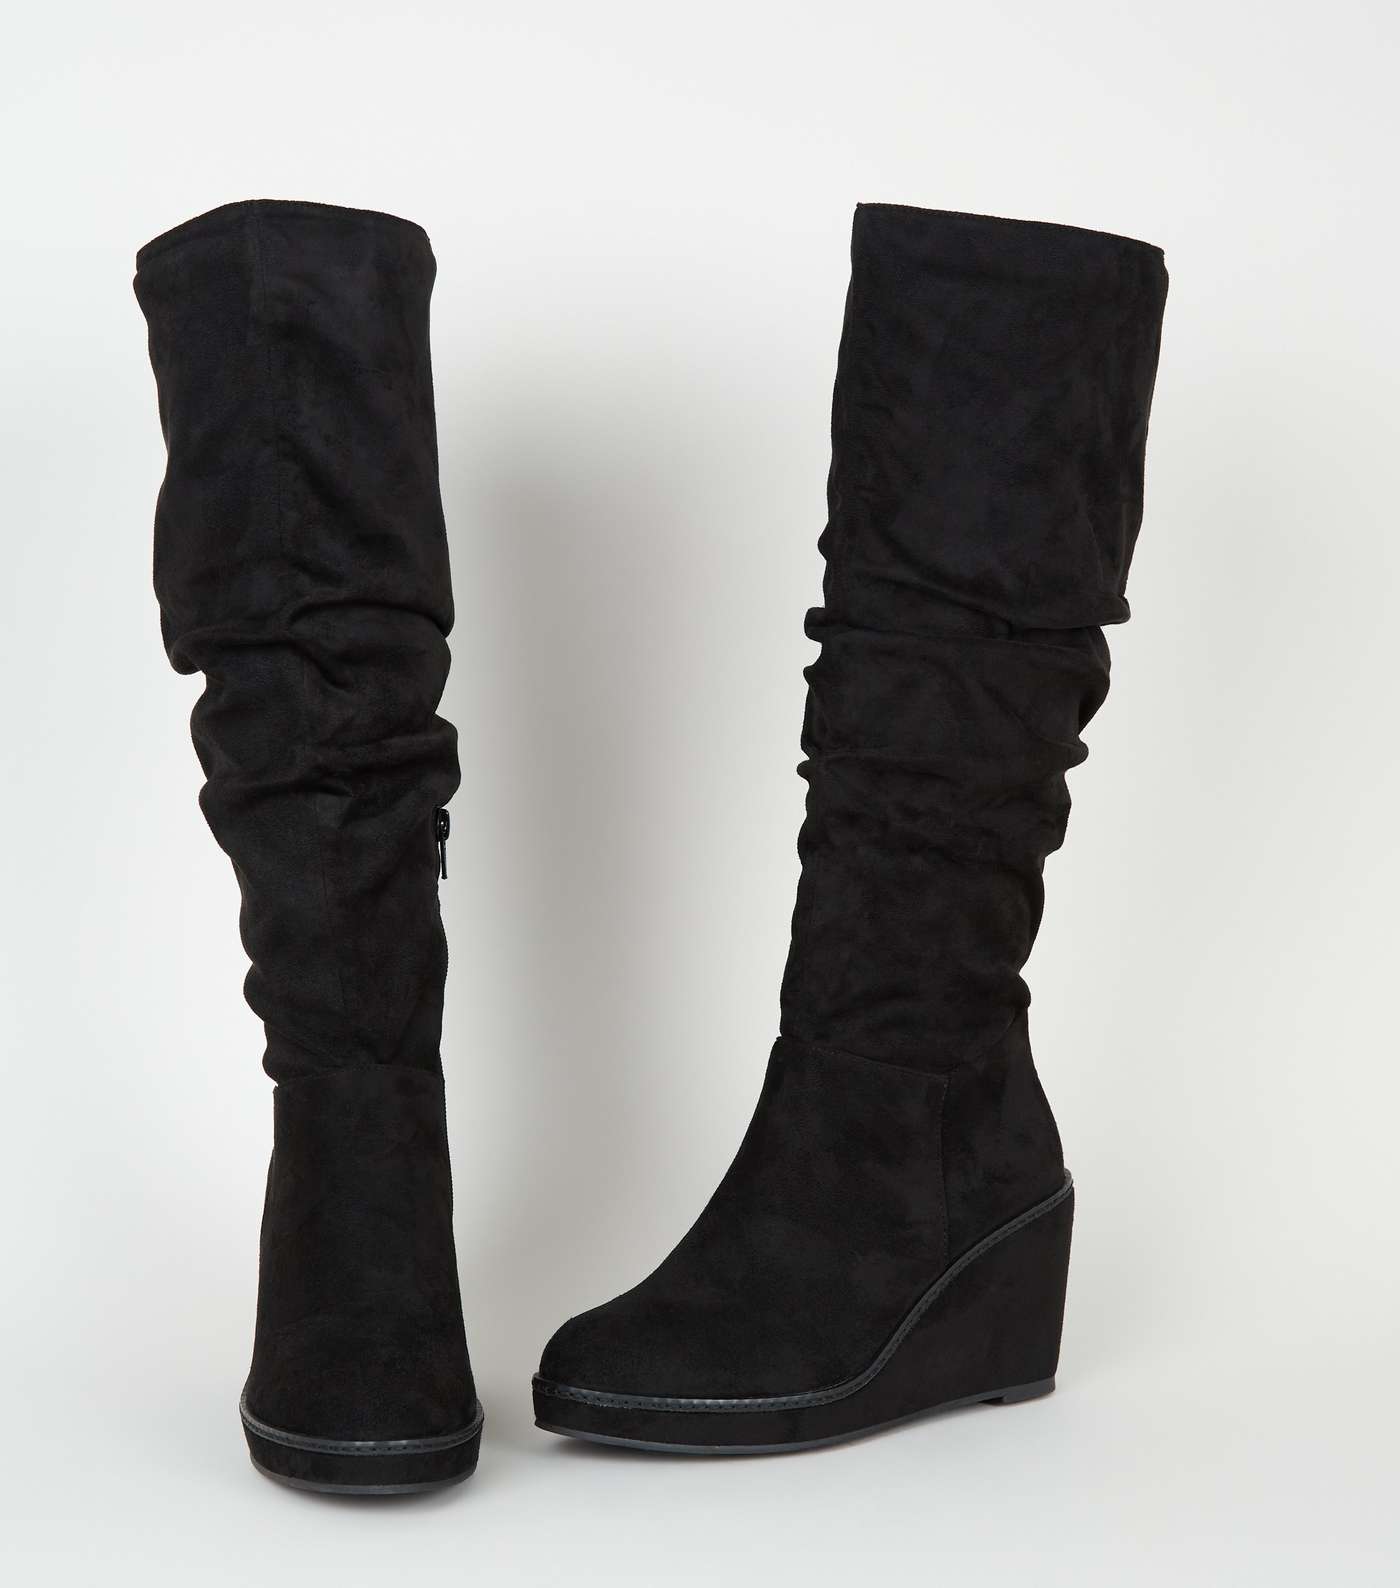 Black Suedette Knee High Slouch Wedge Boots Image 3